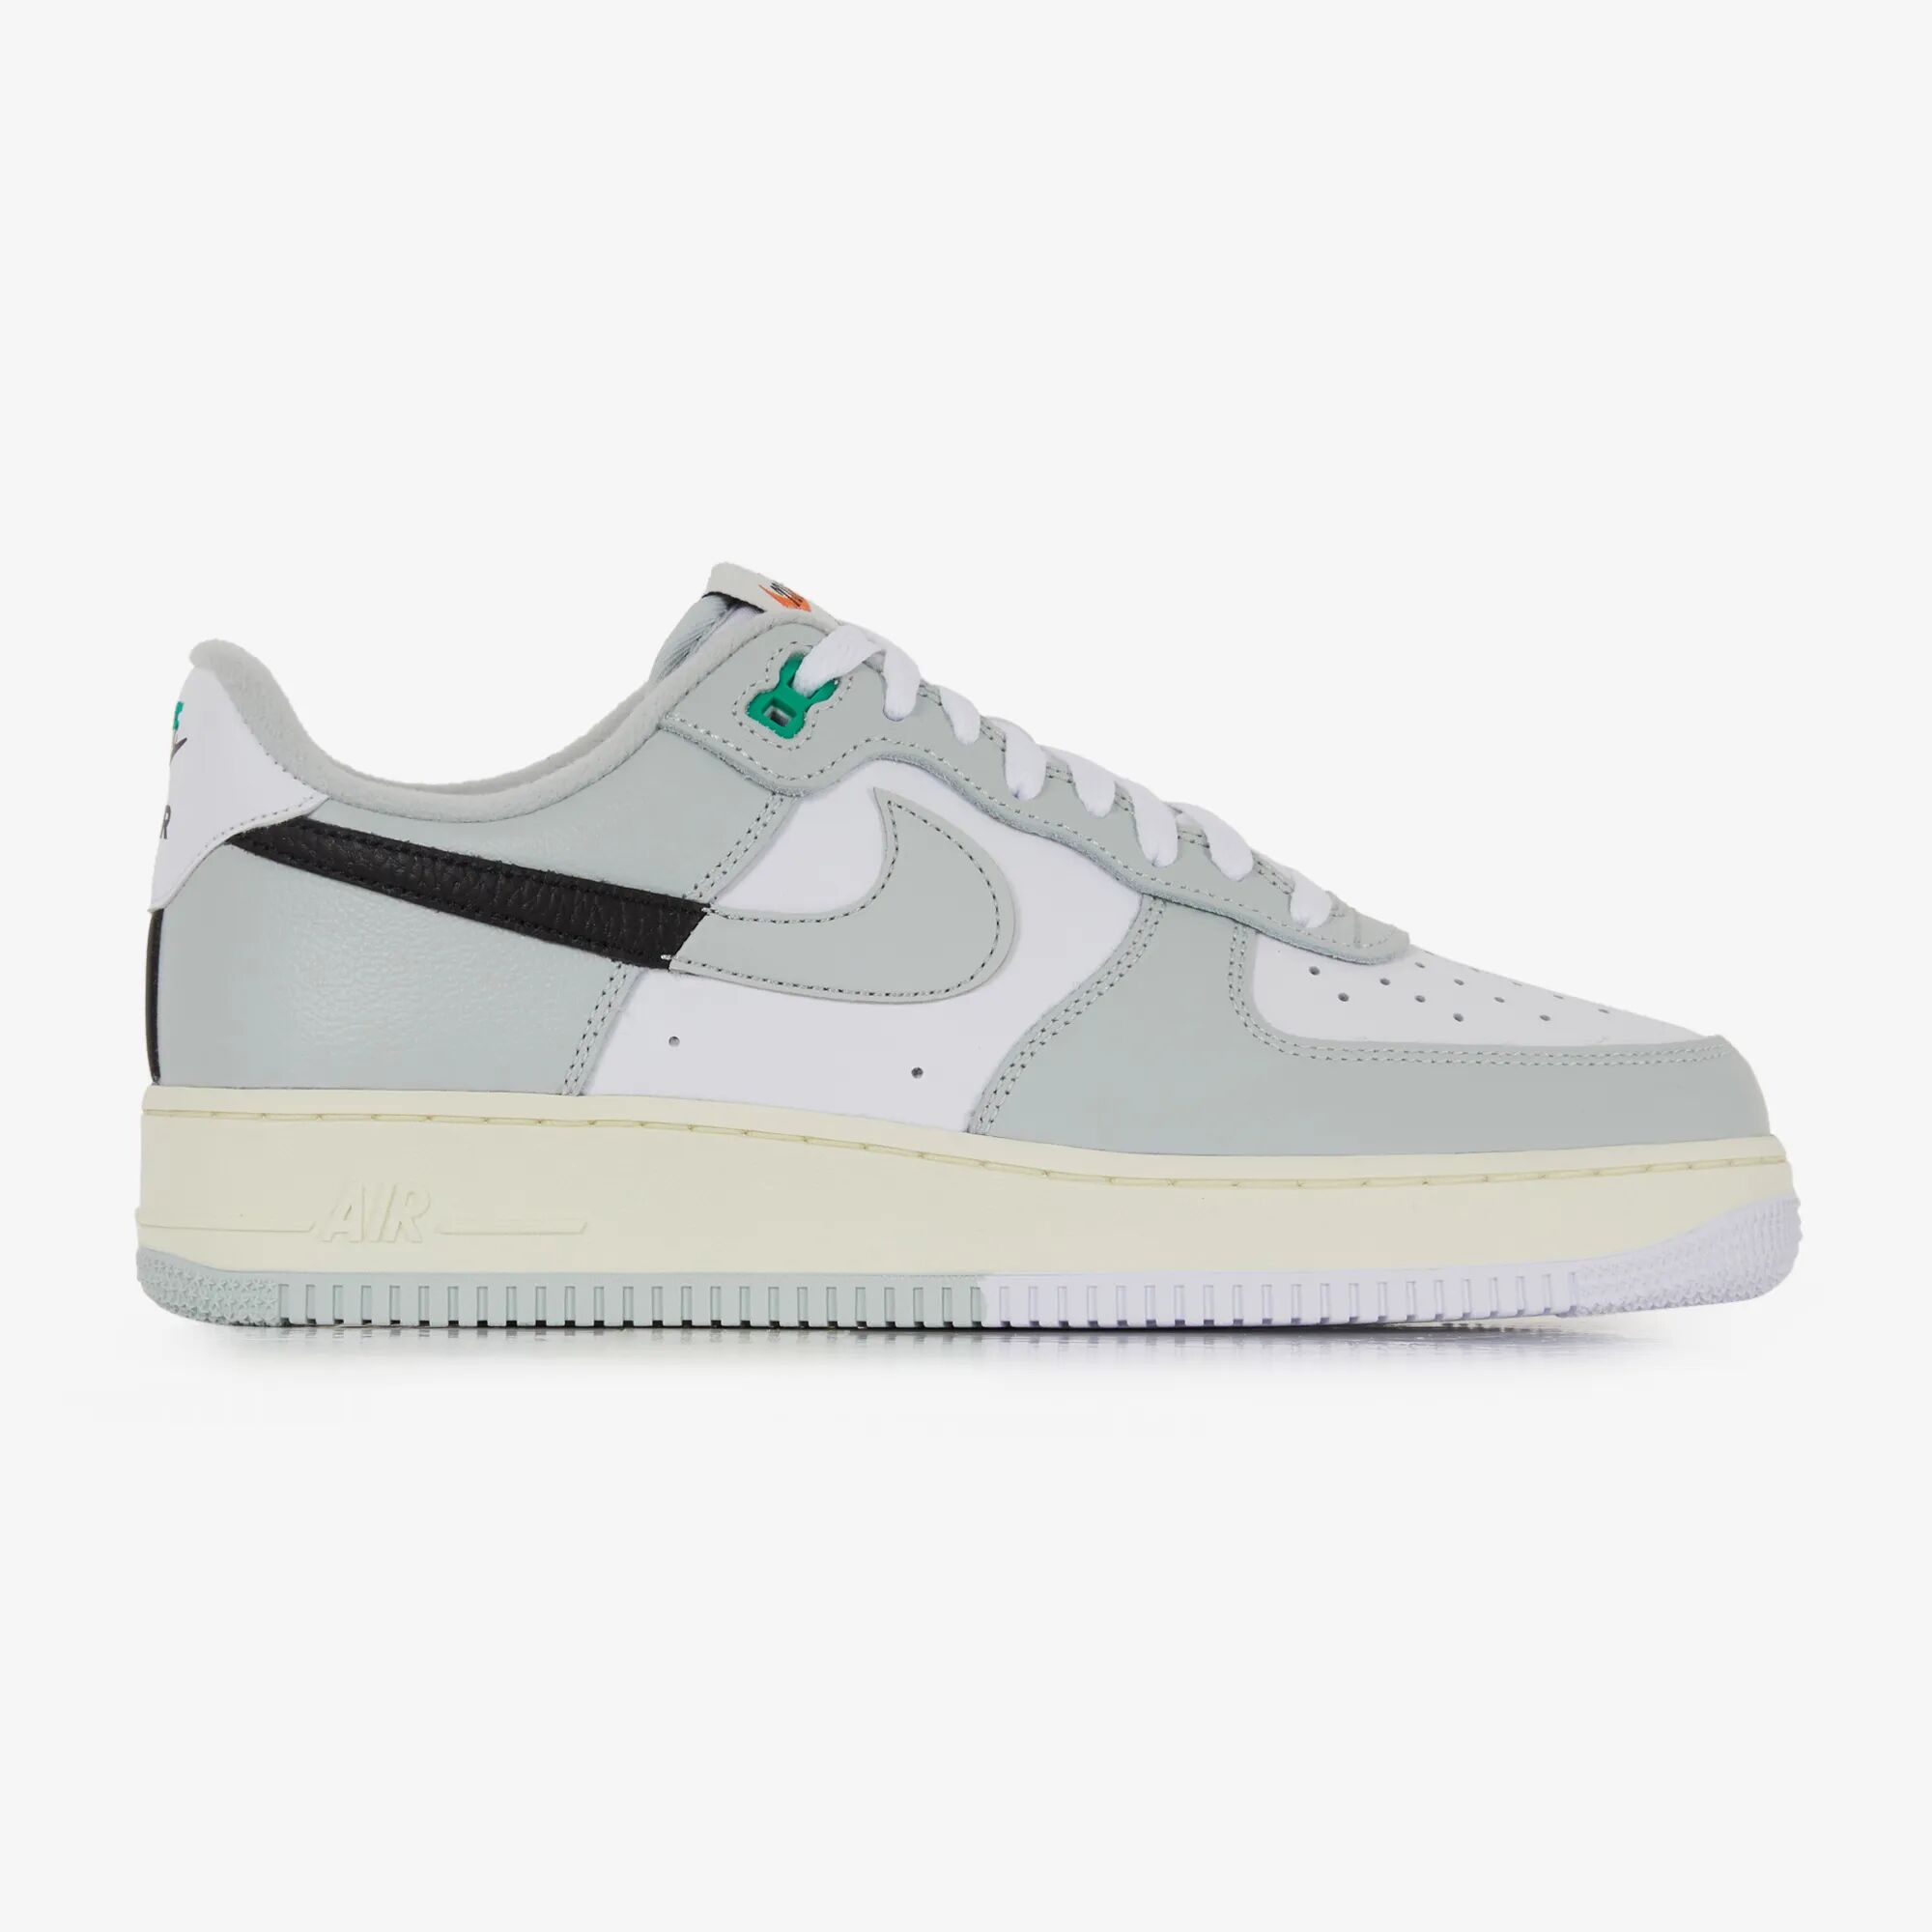 Nike Air Force 1 Low Lv8 blanc/gris 46 homme